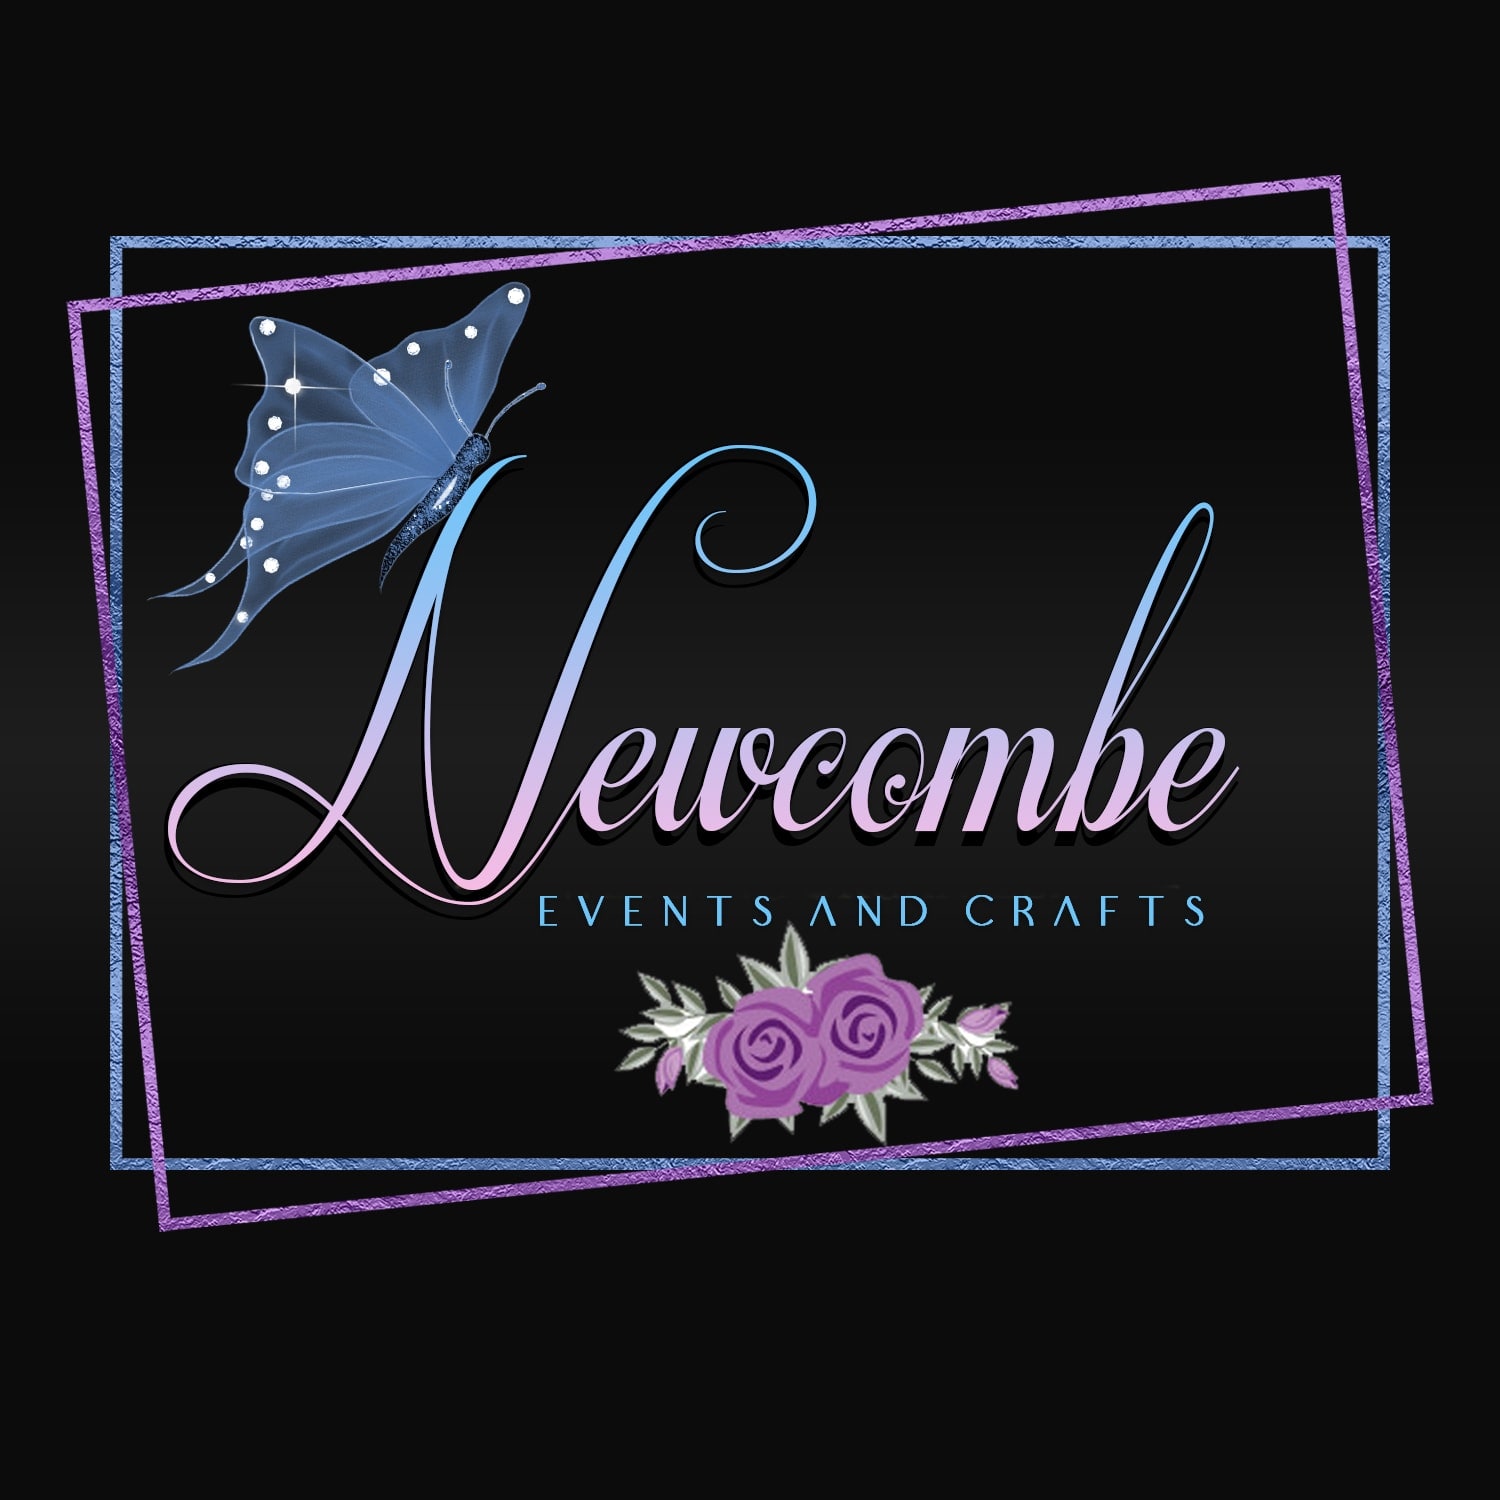 Newcombe Events and Crafts LLC